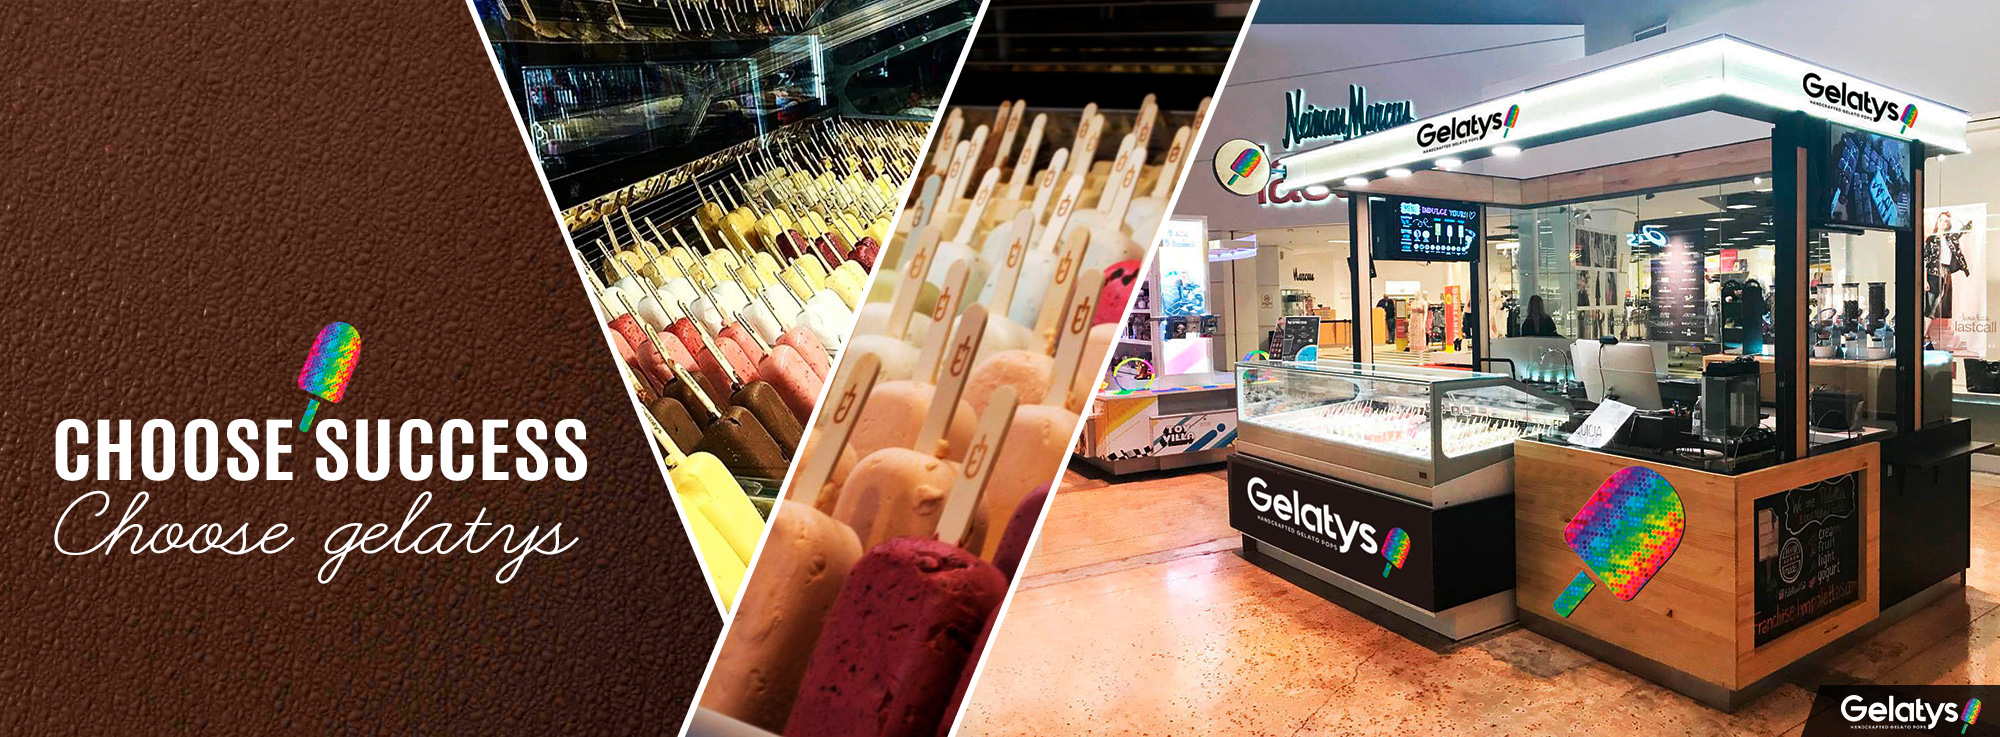 THE BENEFITS OF FRANCHISING A SUCCESSFUL BUSINESS, franchising, gelato pops, artisan gelato